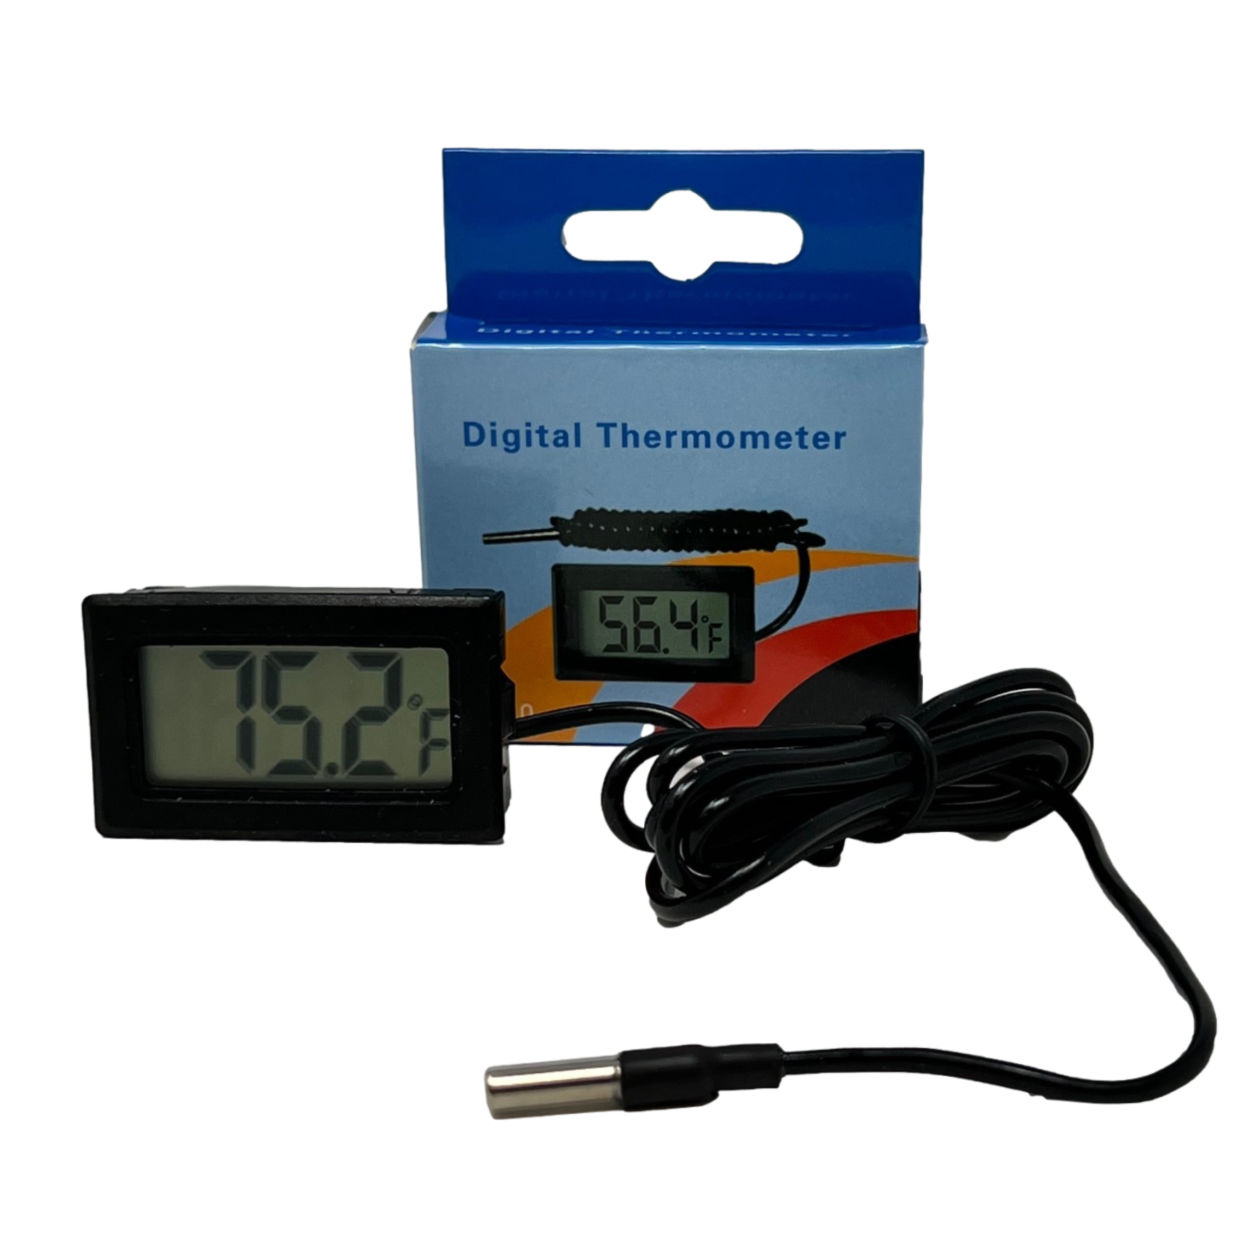 https://www.mycolabs.com/resize/Shared/Images/Product/Mini-Digital-Thermometer-With-36-Temperature-Probe/mini_therm_web_final.jpg?bw=1000&w=1000&bh=1000&h=1000